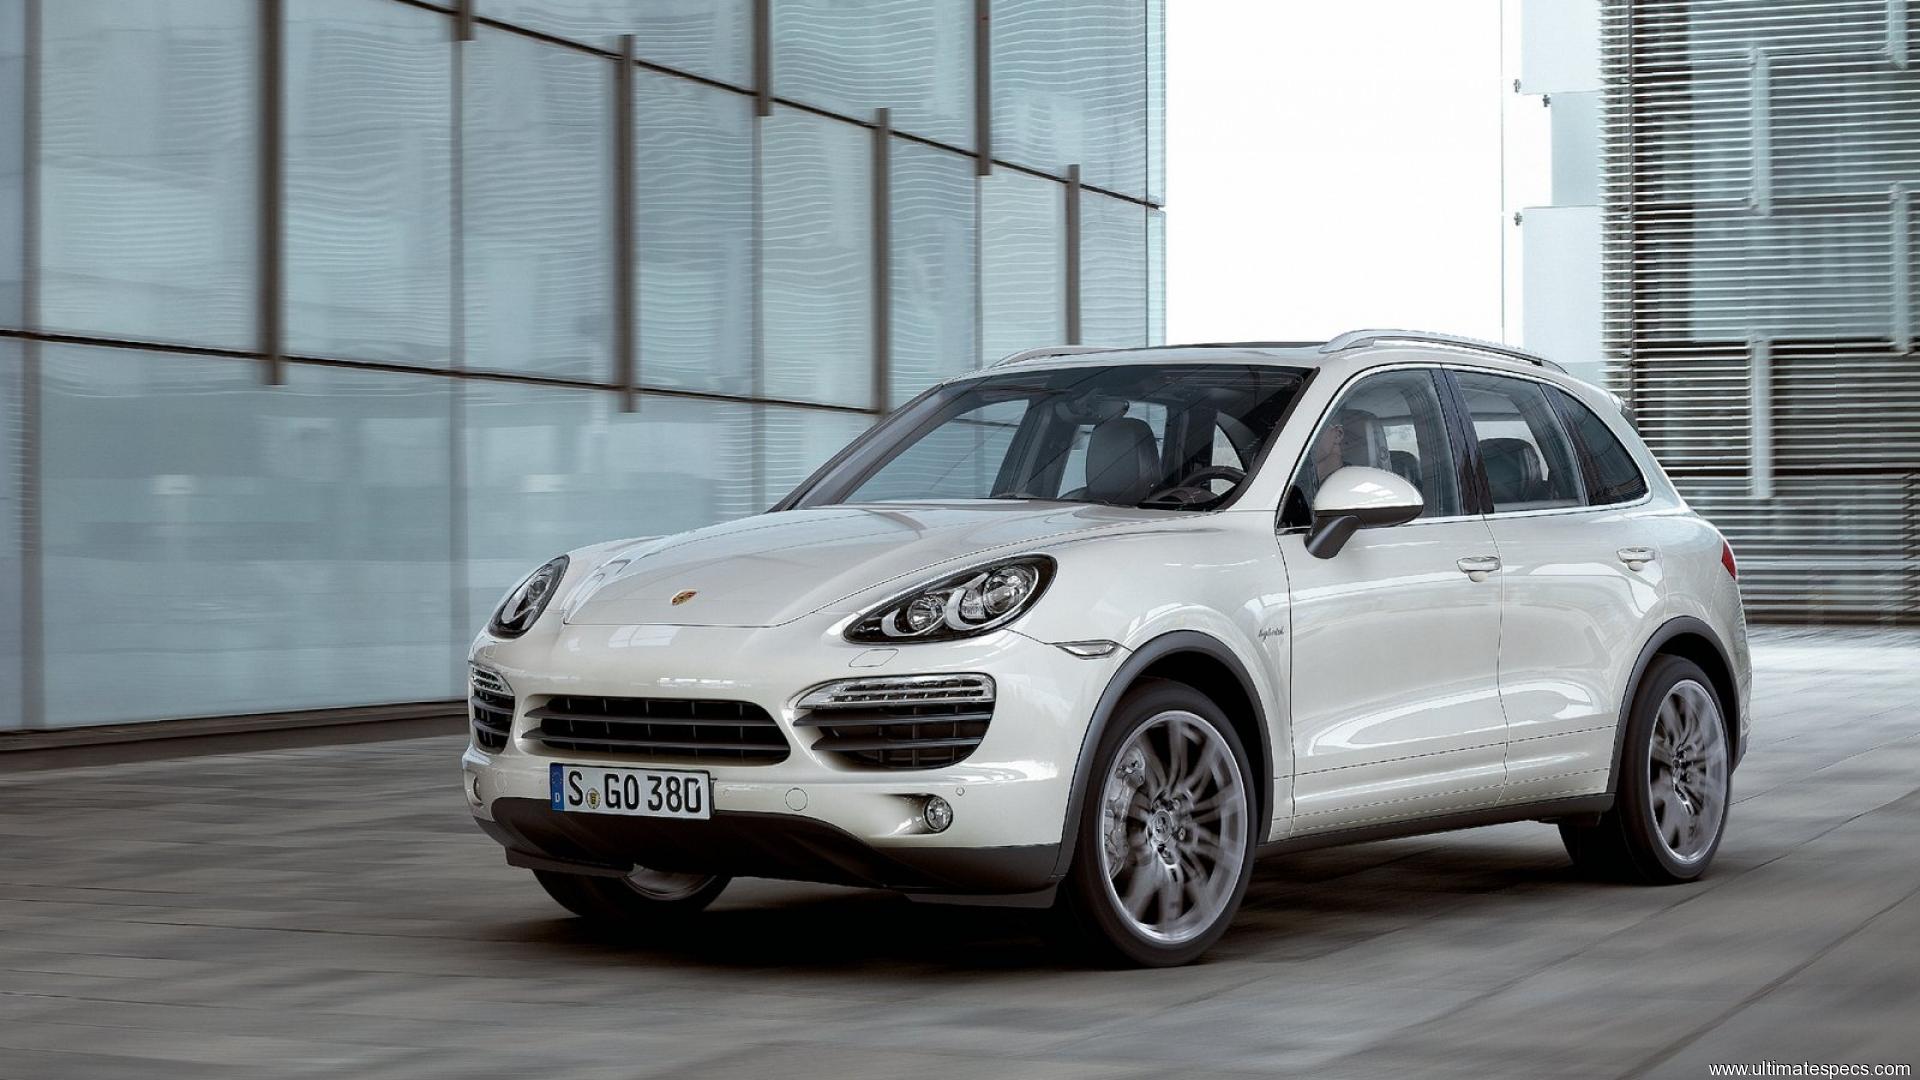 Porsche Cayenne II Images, pictures, gallery